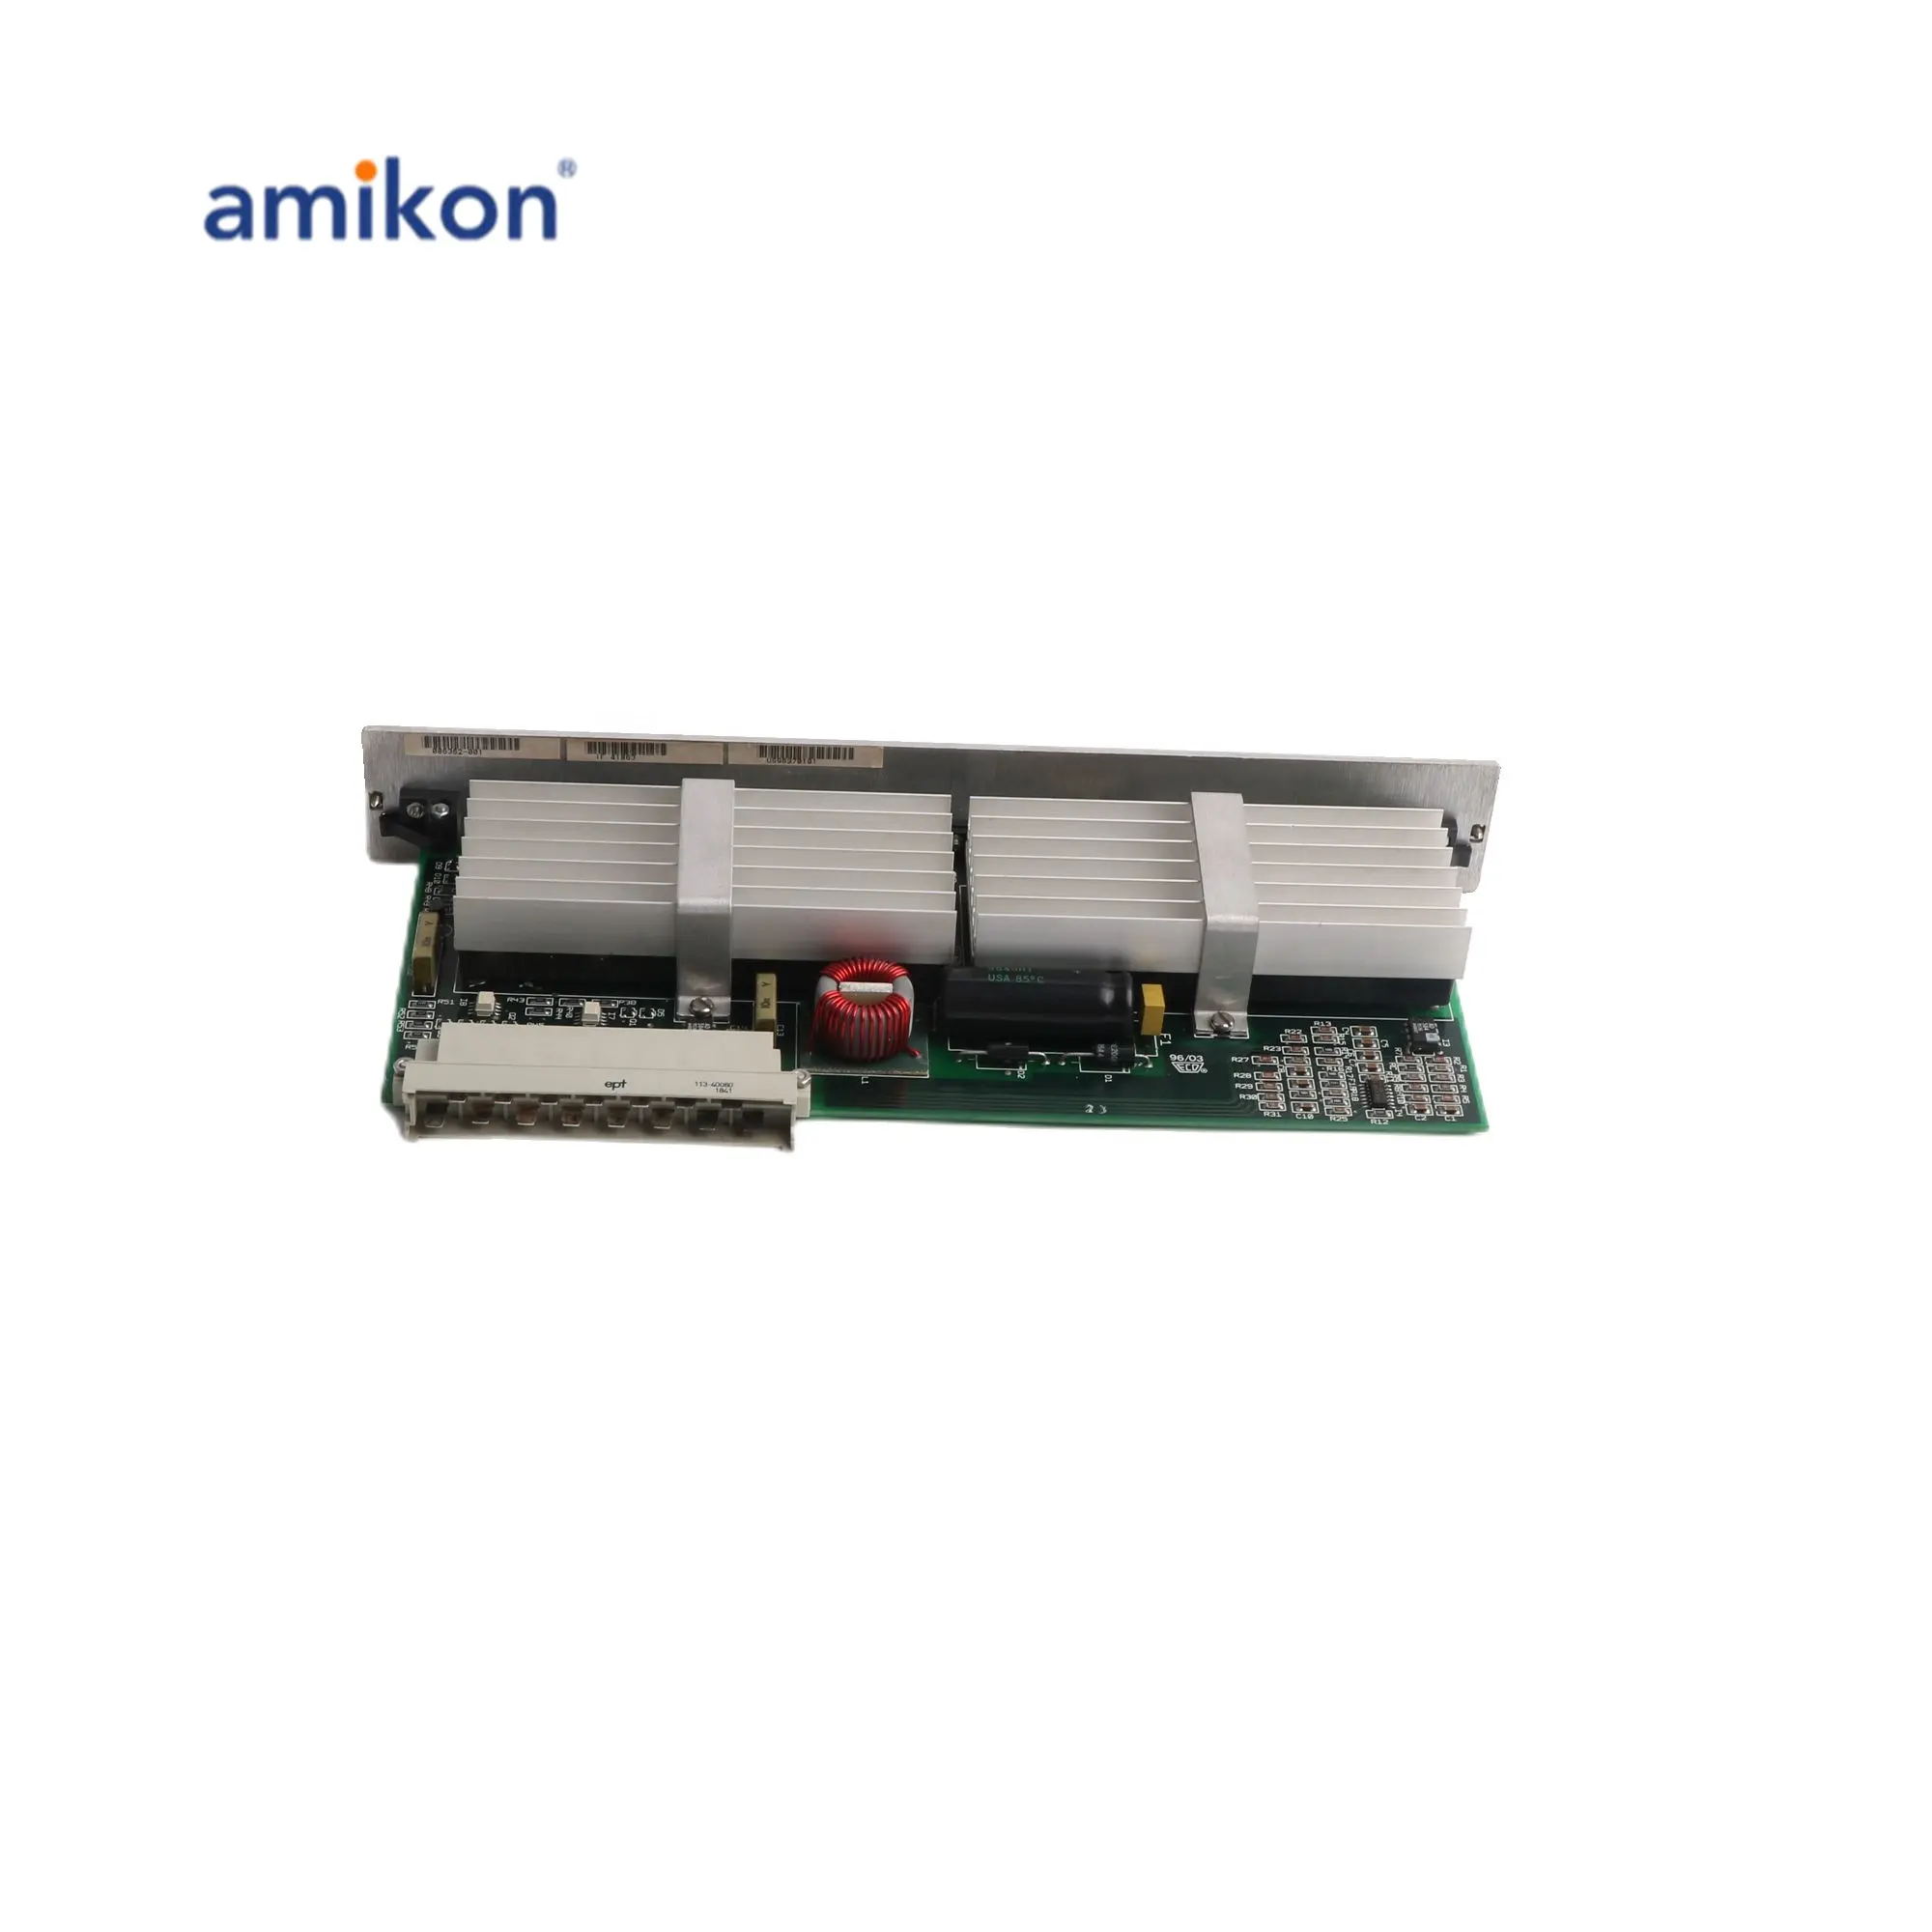 Competitive Price A BB 086362-001 Bulk DC Power Supply Module 24-hour service